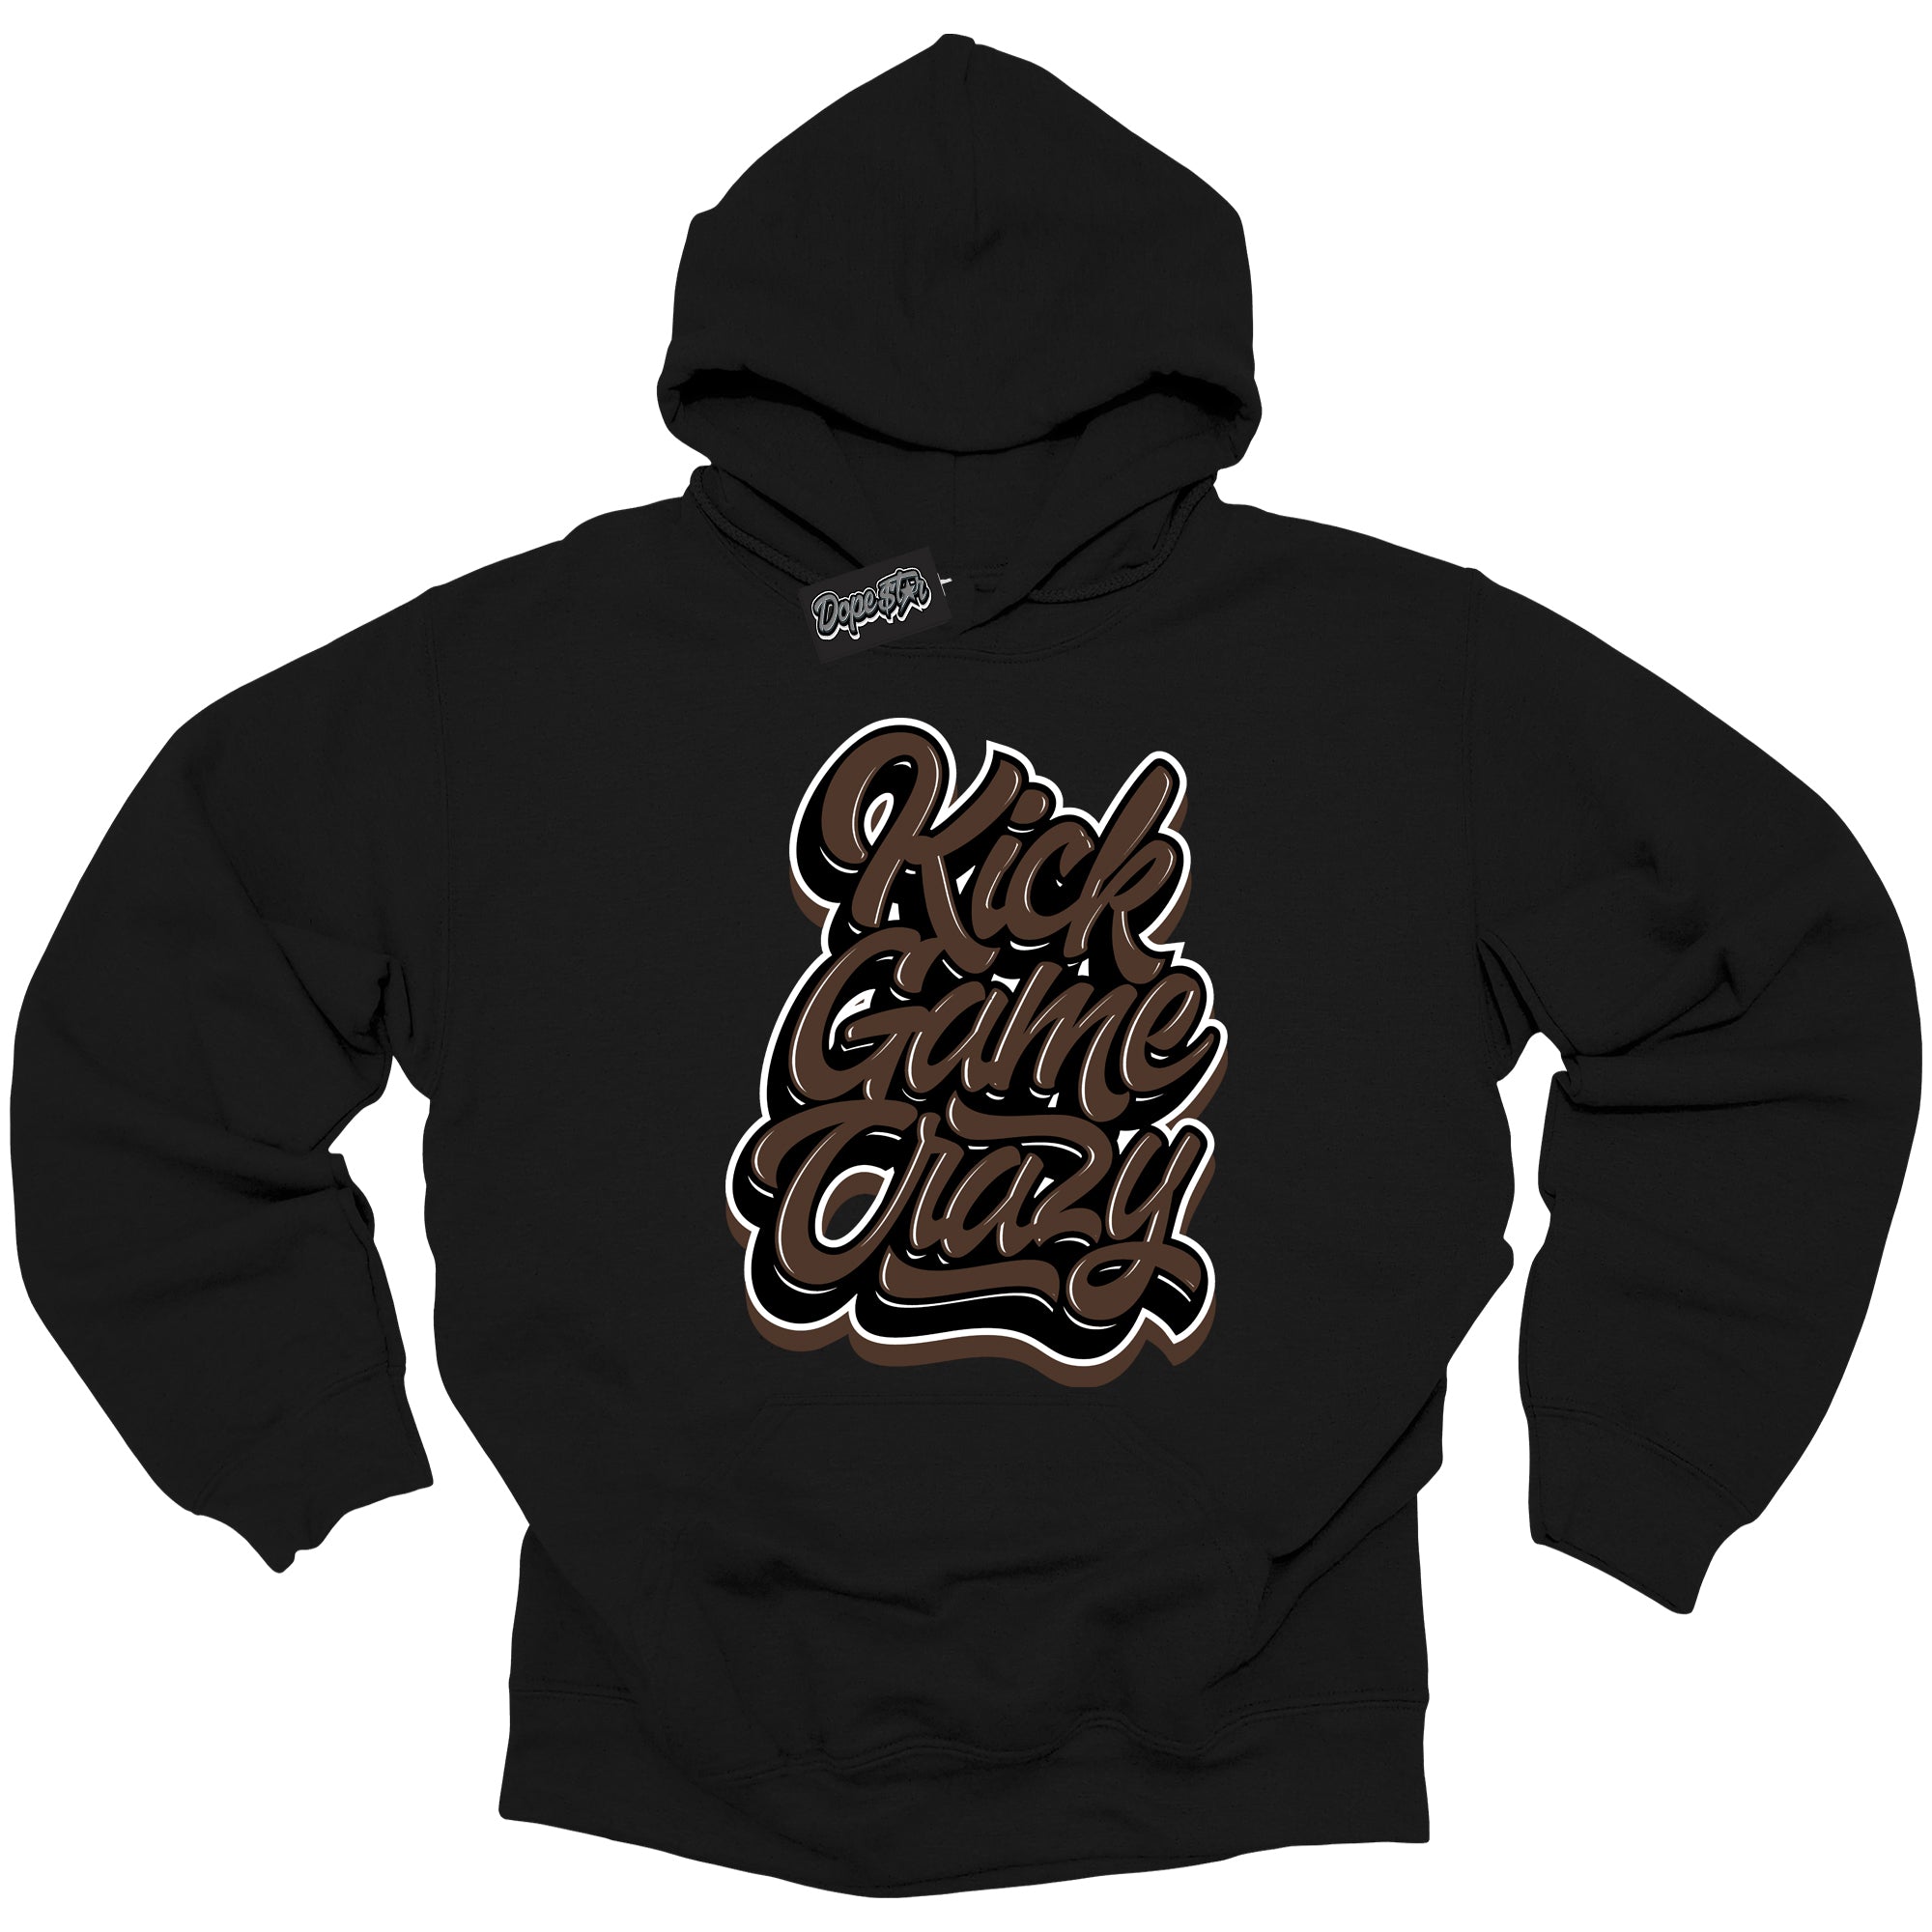 Cool Black Graphic DopeStar Hoodie with “ Kick Game Crazy “ print, that perfectly matches Palomino 1s sneakers